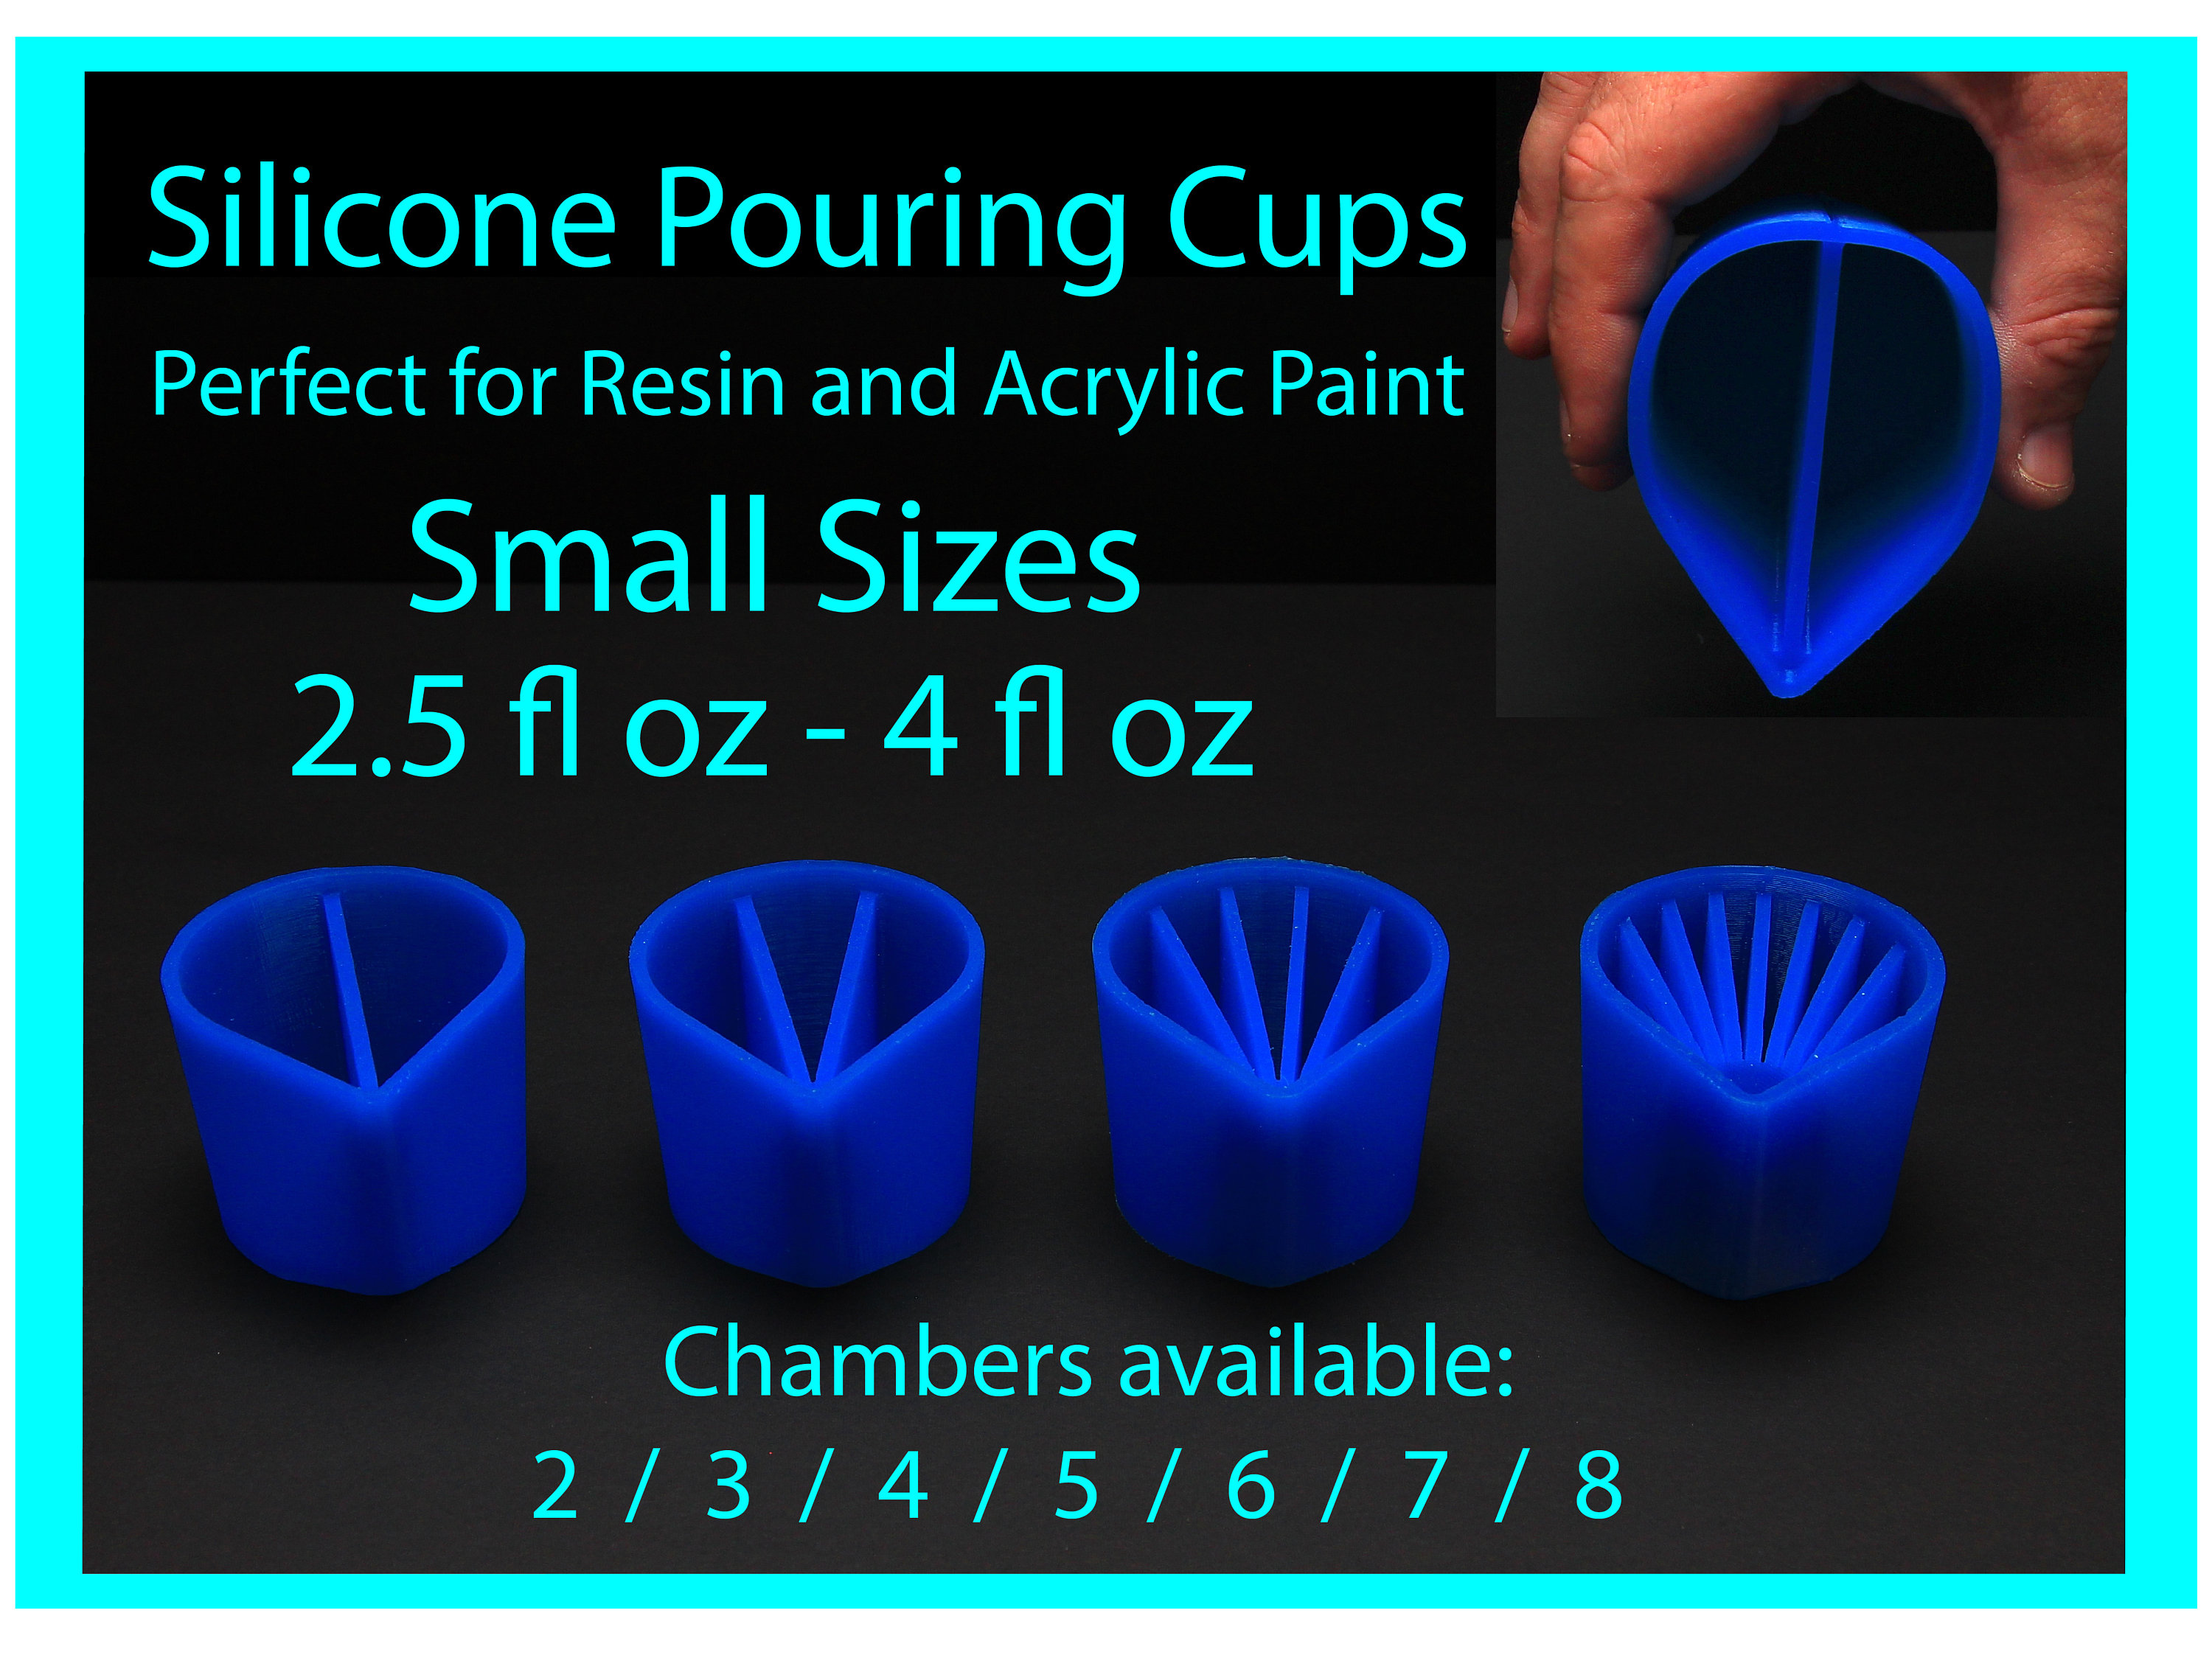 Silicone Pour Split Cups Sectioned for Multicolor Pours 1,2,3,4 & 5  Chambers for Use With Resin, Paint, and More Druid Dice 